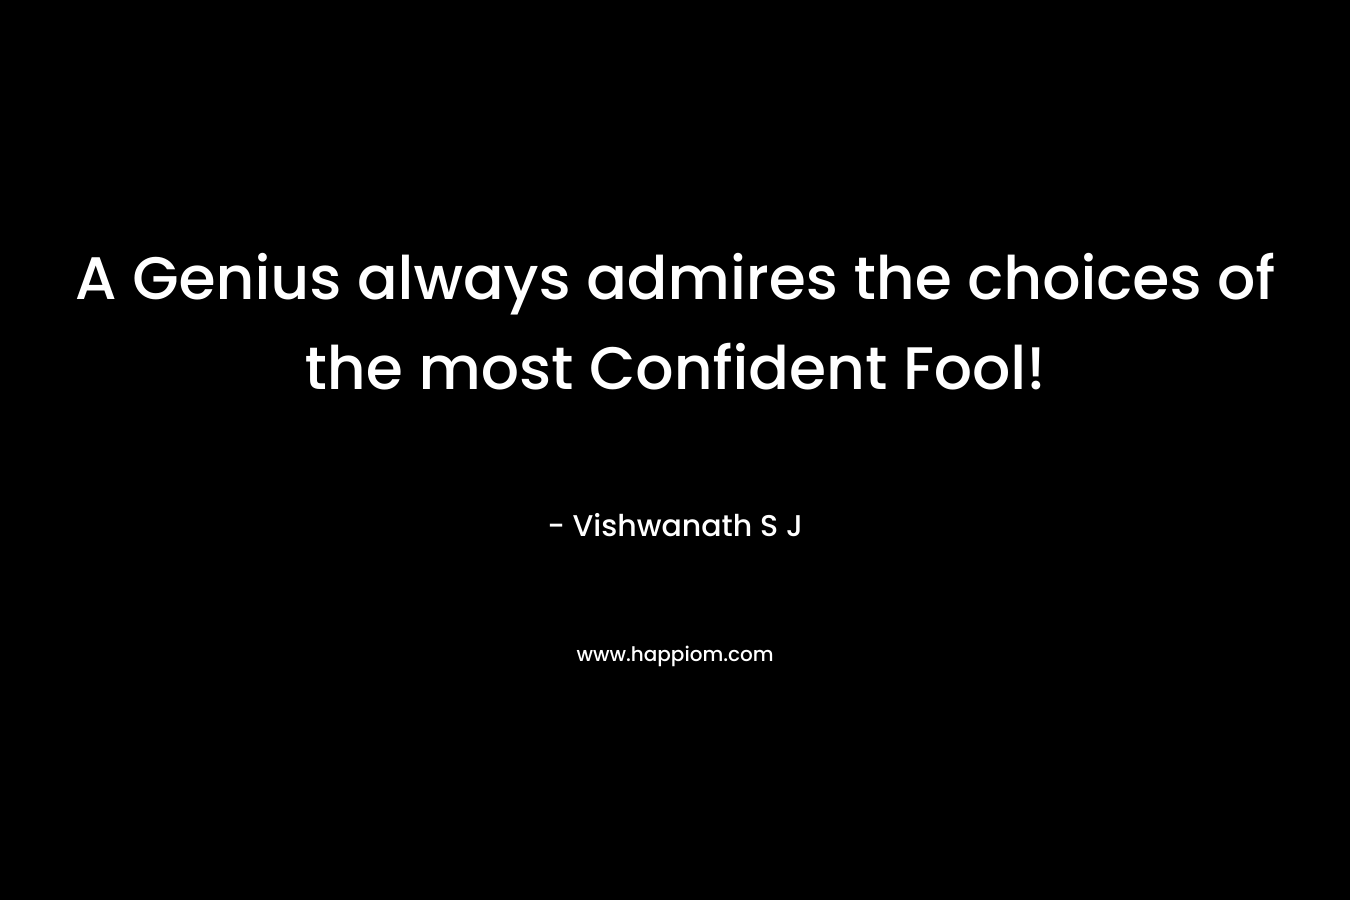 A Genius always admires the choices of the most Confident Fool!